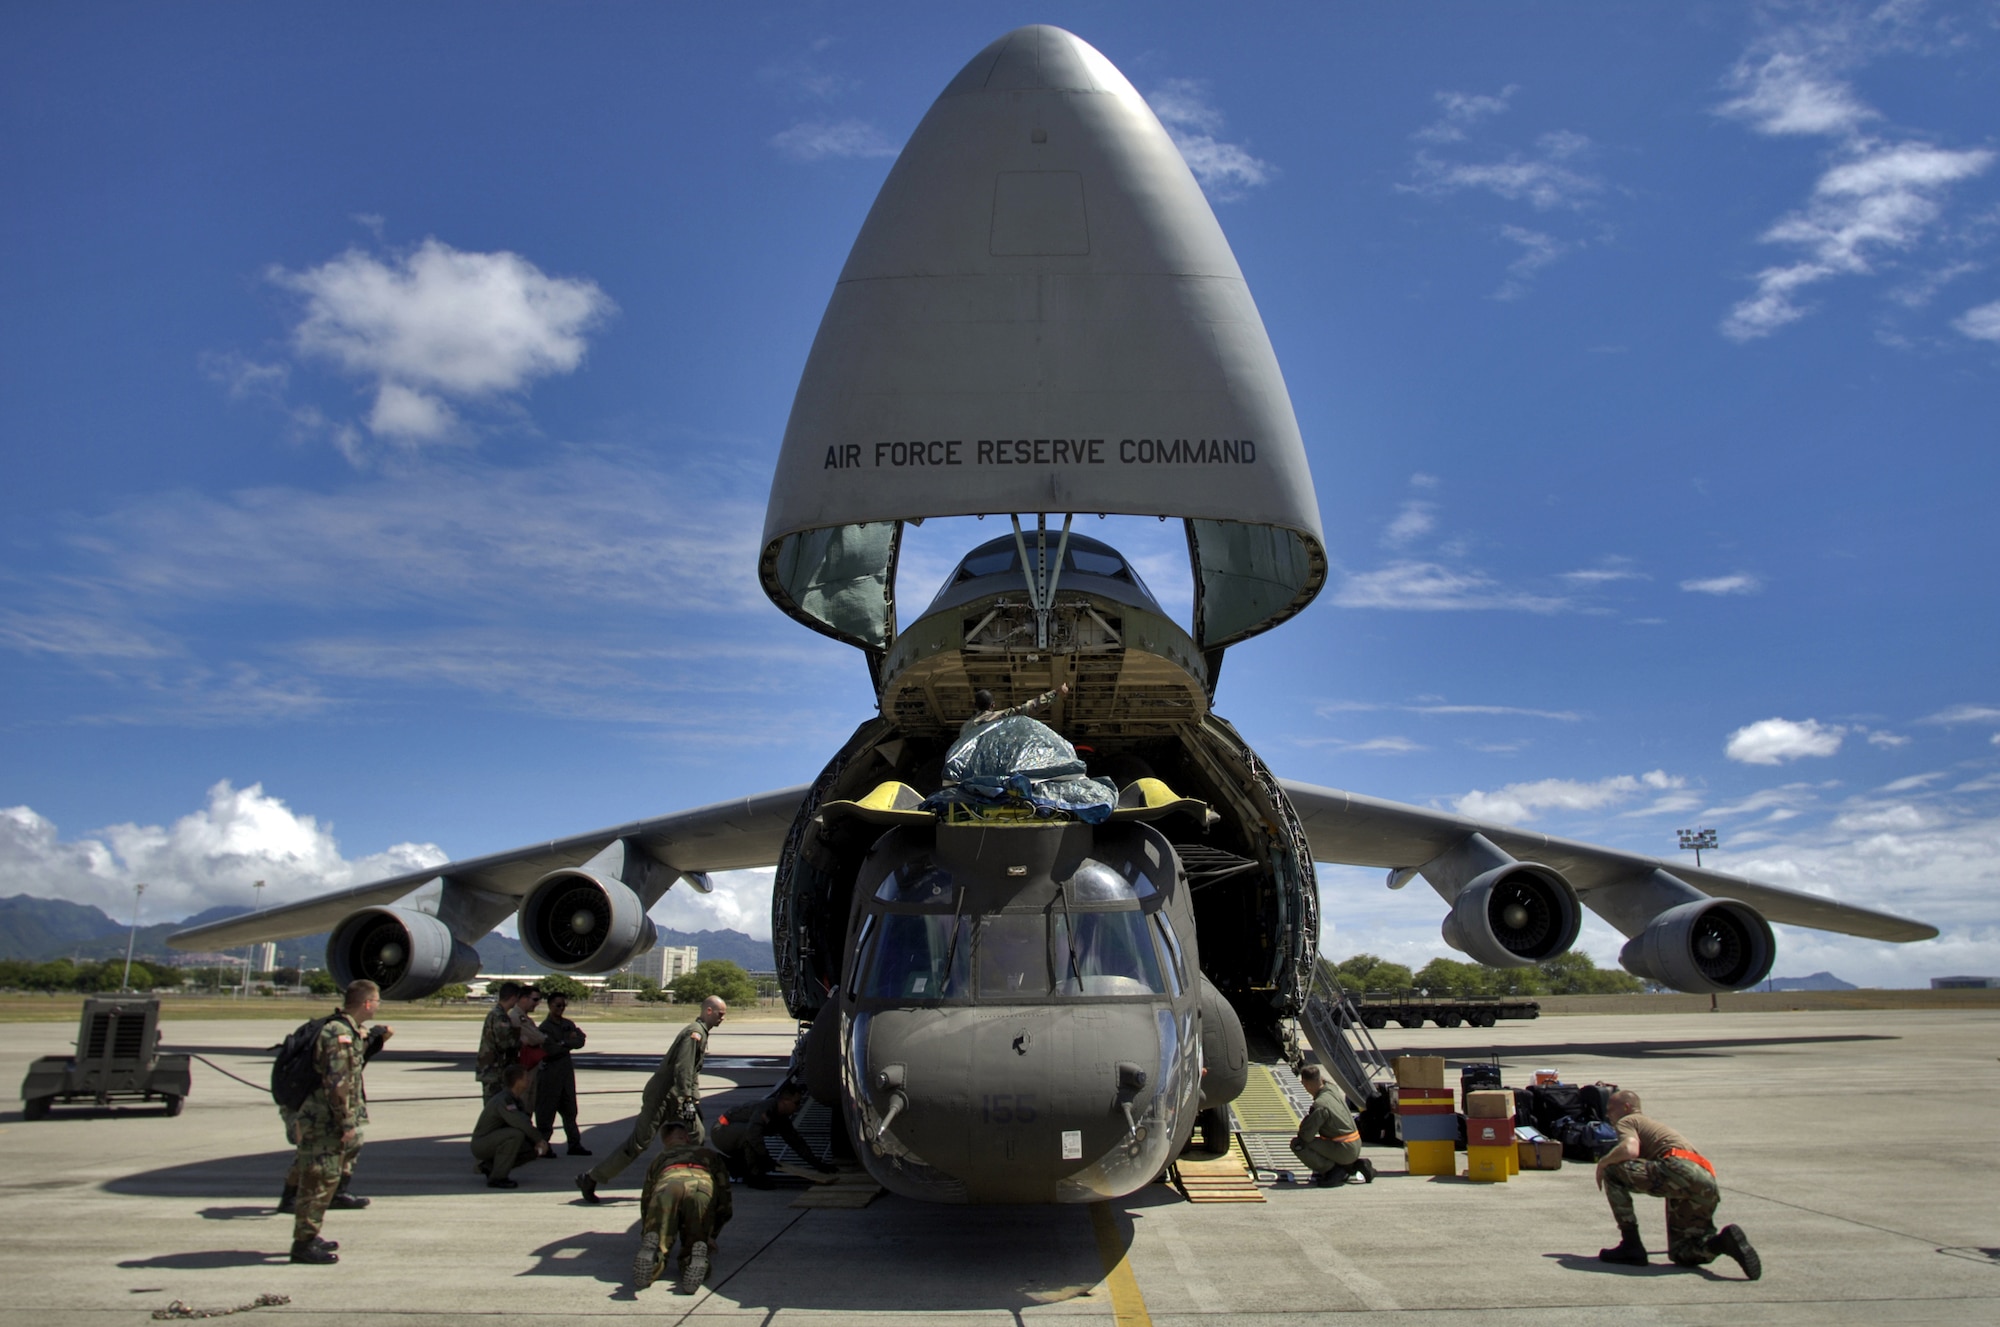 HICKAM AIR FORCE BASE, Hawaii -- Airmen and Soldiers load a CH-47 Chinook heavy lift helicopter onto a C-5 Galaxy here. Company B, 214th Aviation Regiment of the 2nd Battalion, 25th Aviation Regiment at nearby Wheeler Army Air Field, received orders to deploy 60 troops, four helicopters and support equipment to Pakistan to support earthquake relief operations. A total force team here helped load the aircraft Oct. 16. (U.S. Air Force photo by Tech. Sgt. Shane A. Cuomo)